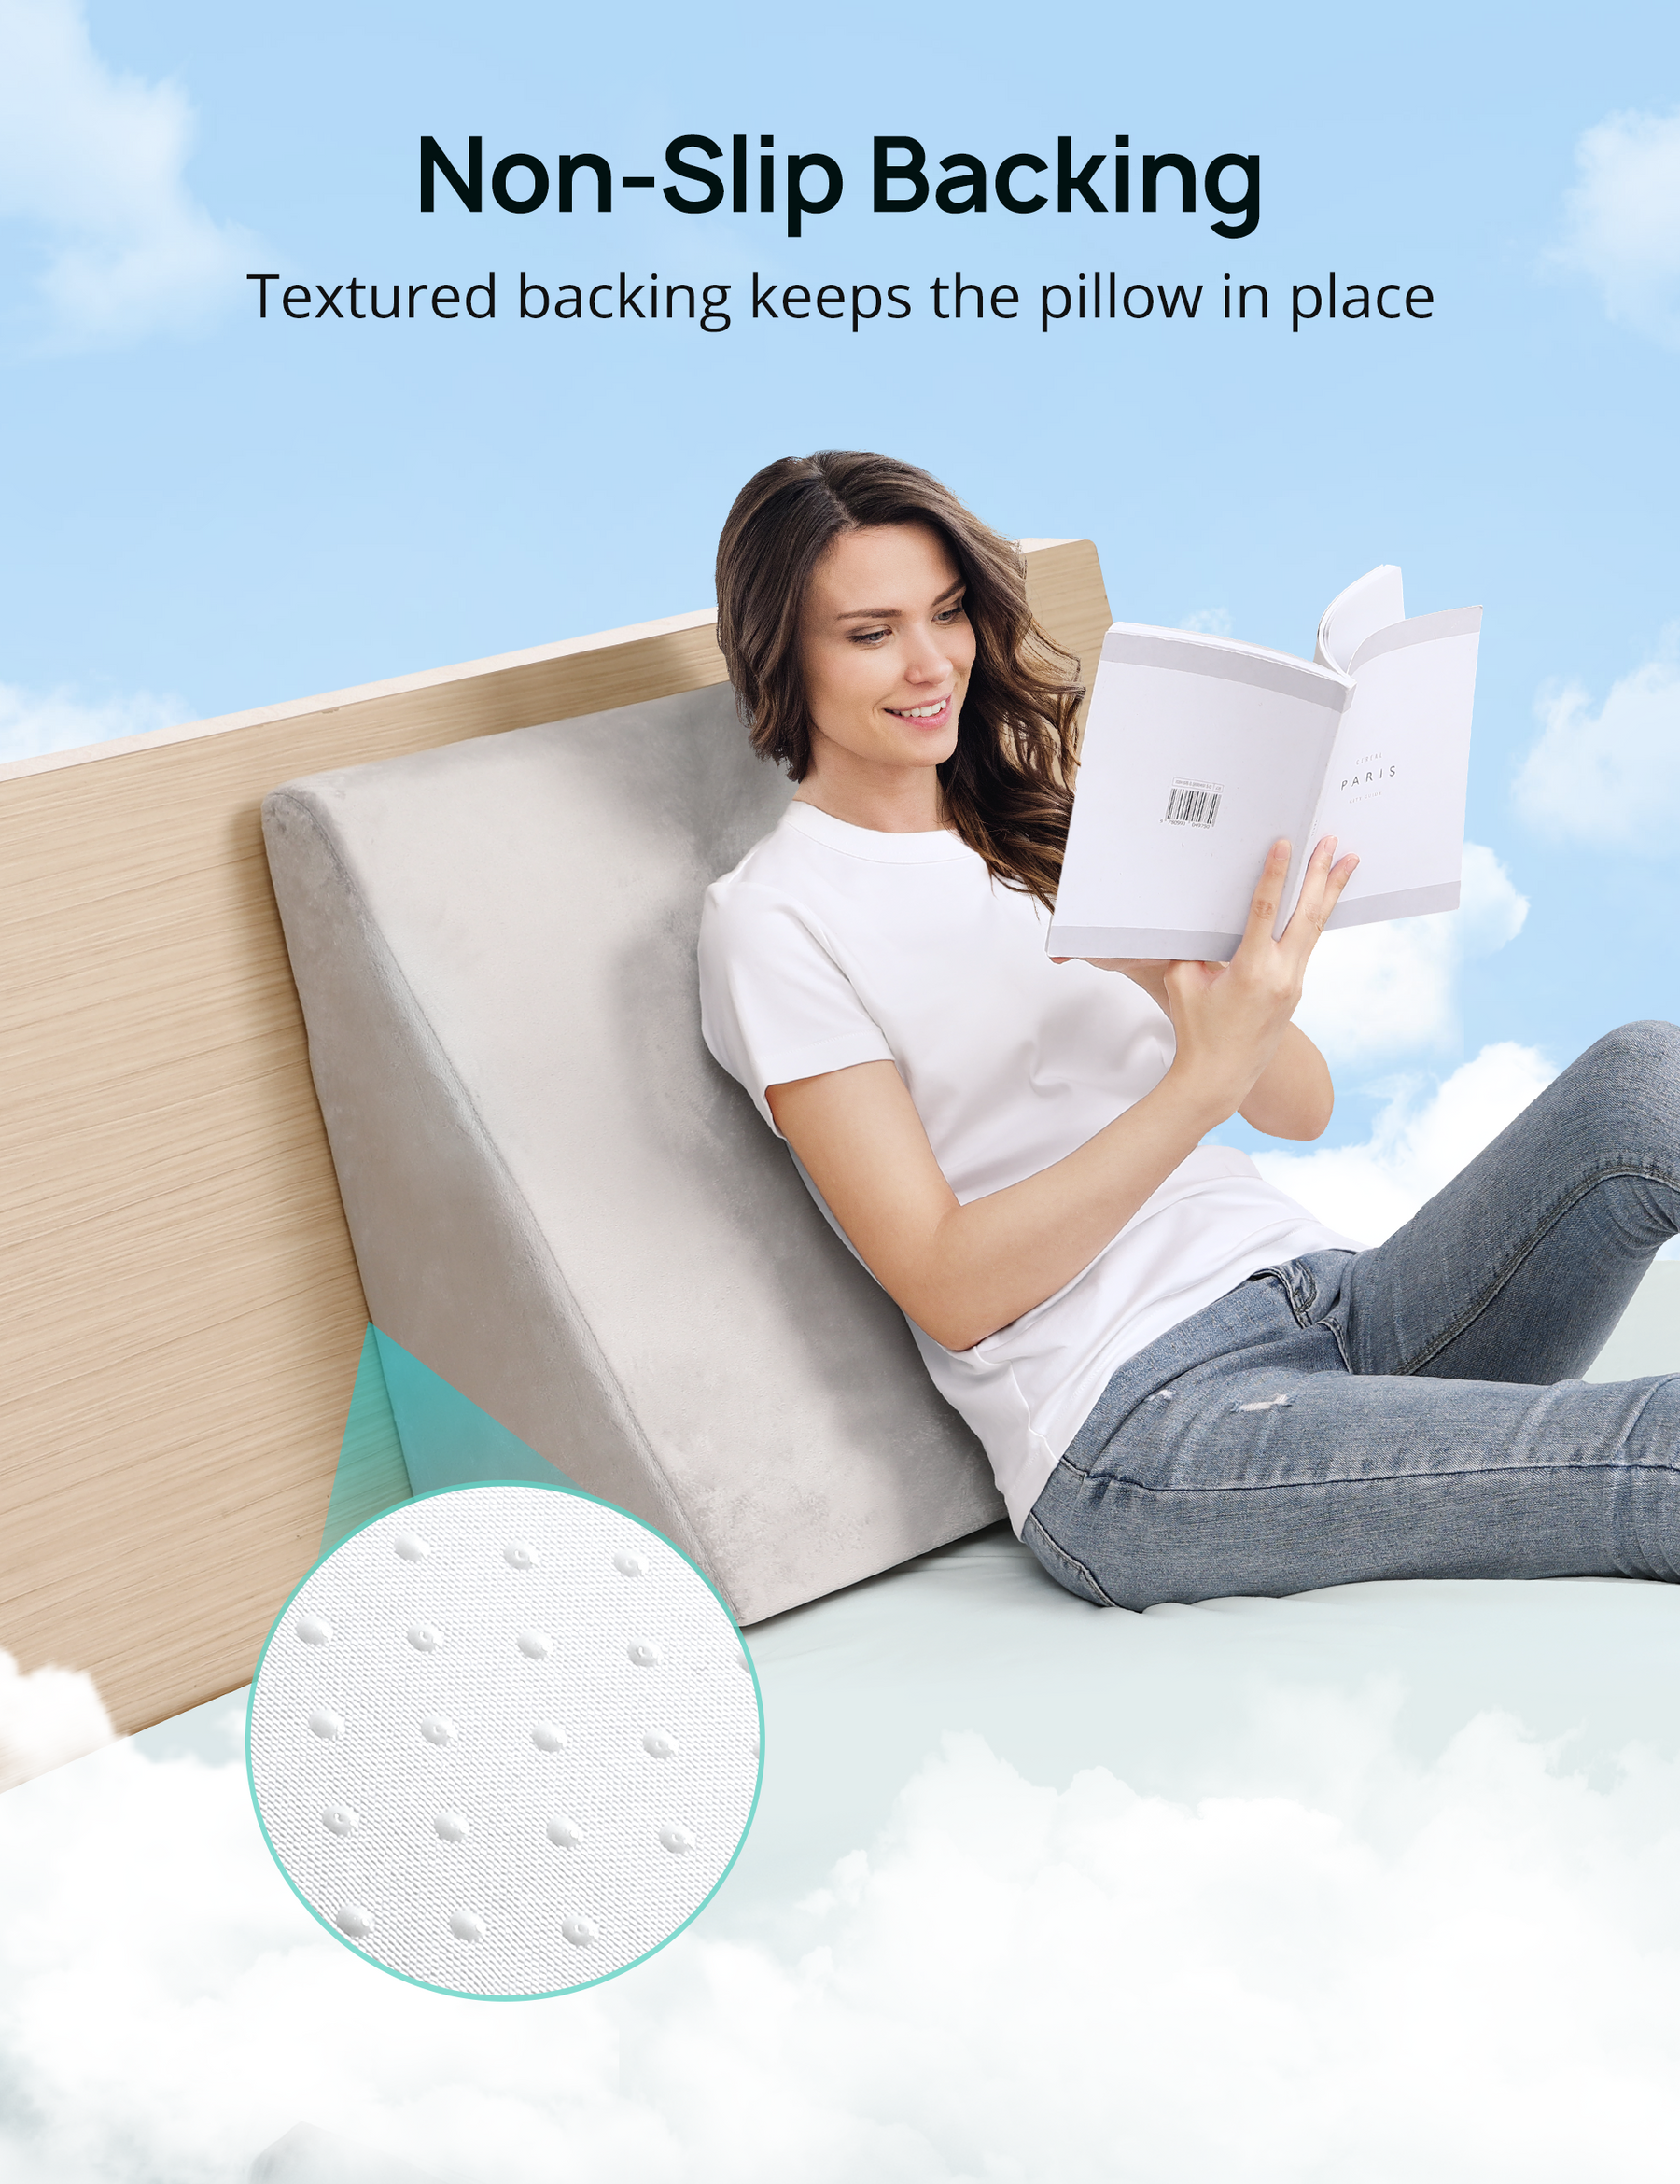 Inflatable Wedge Pillow Leg Elevation Circulation Back Pain Relief